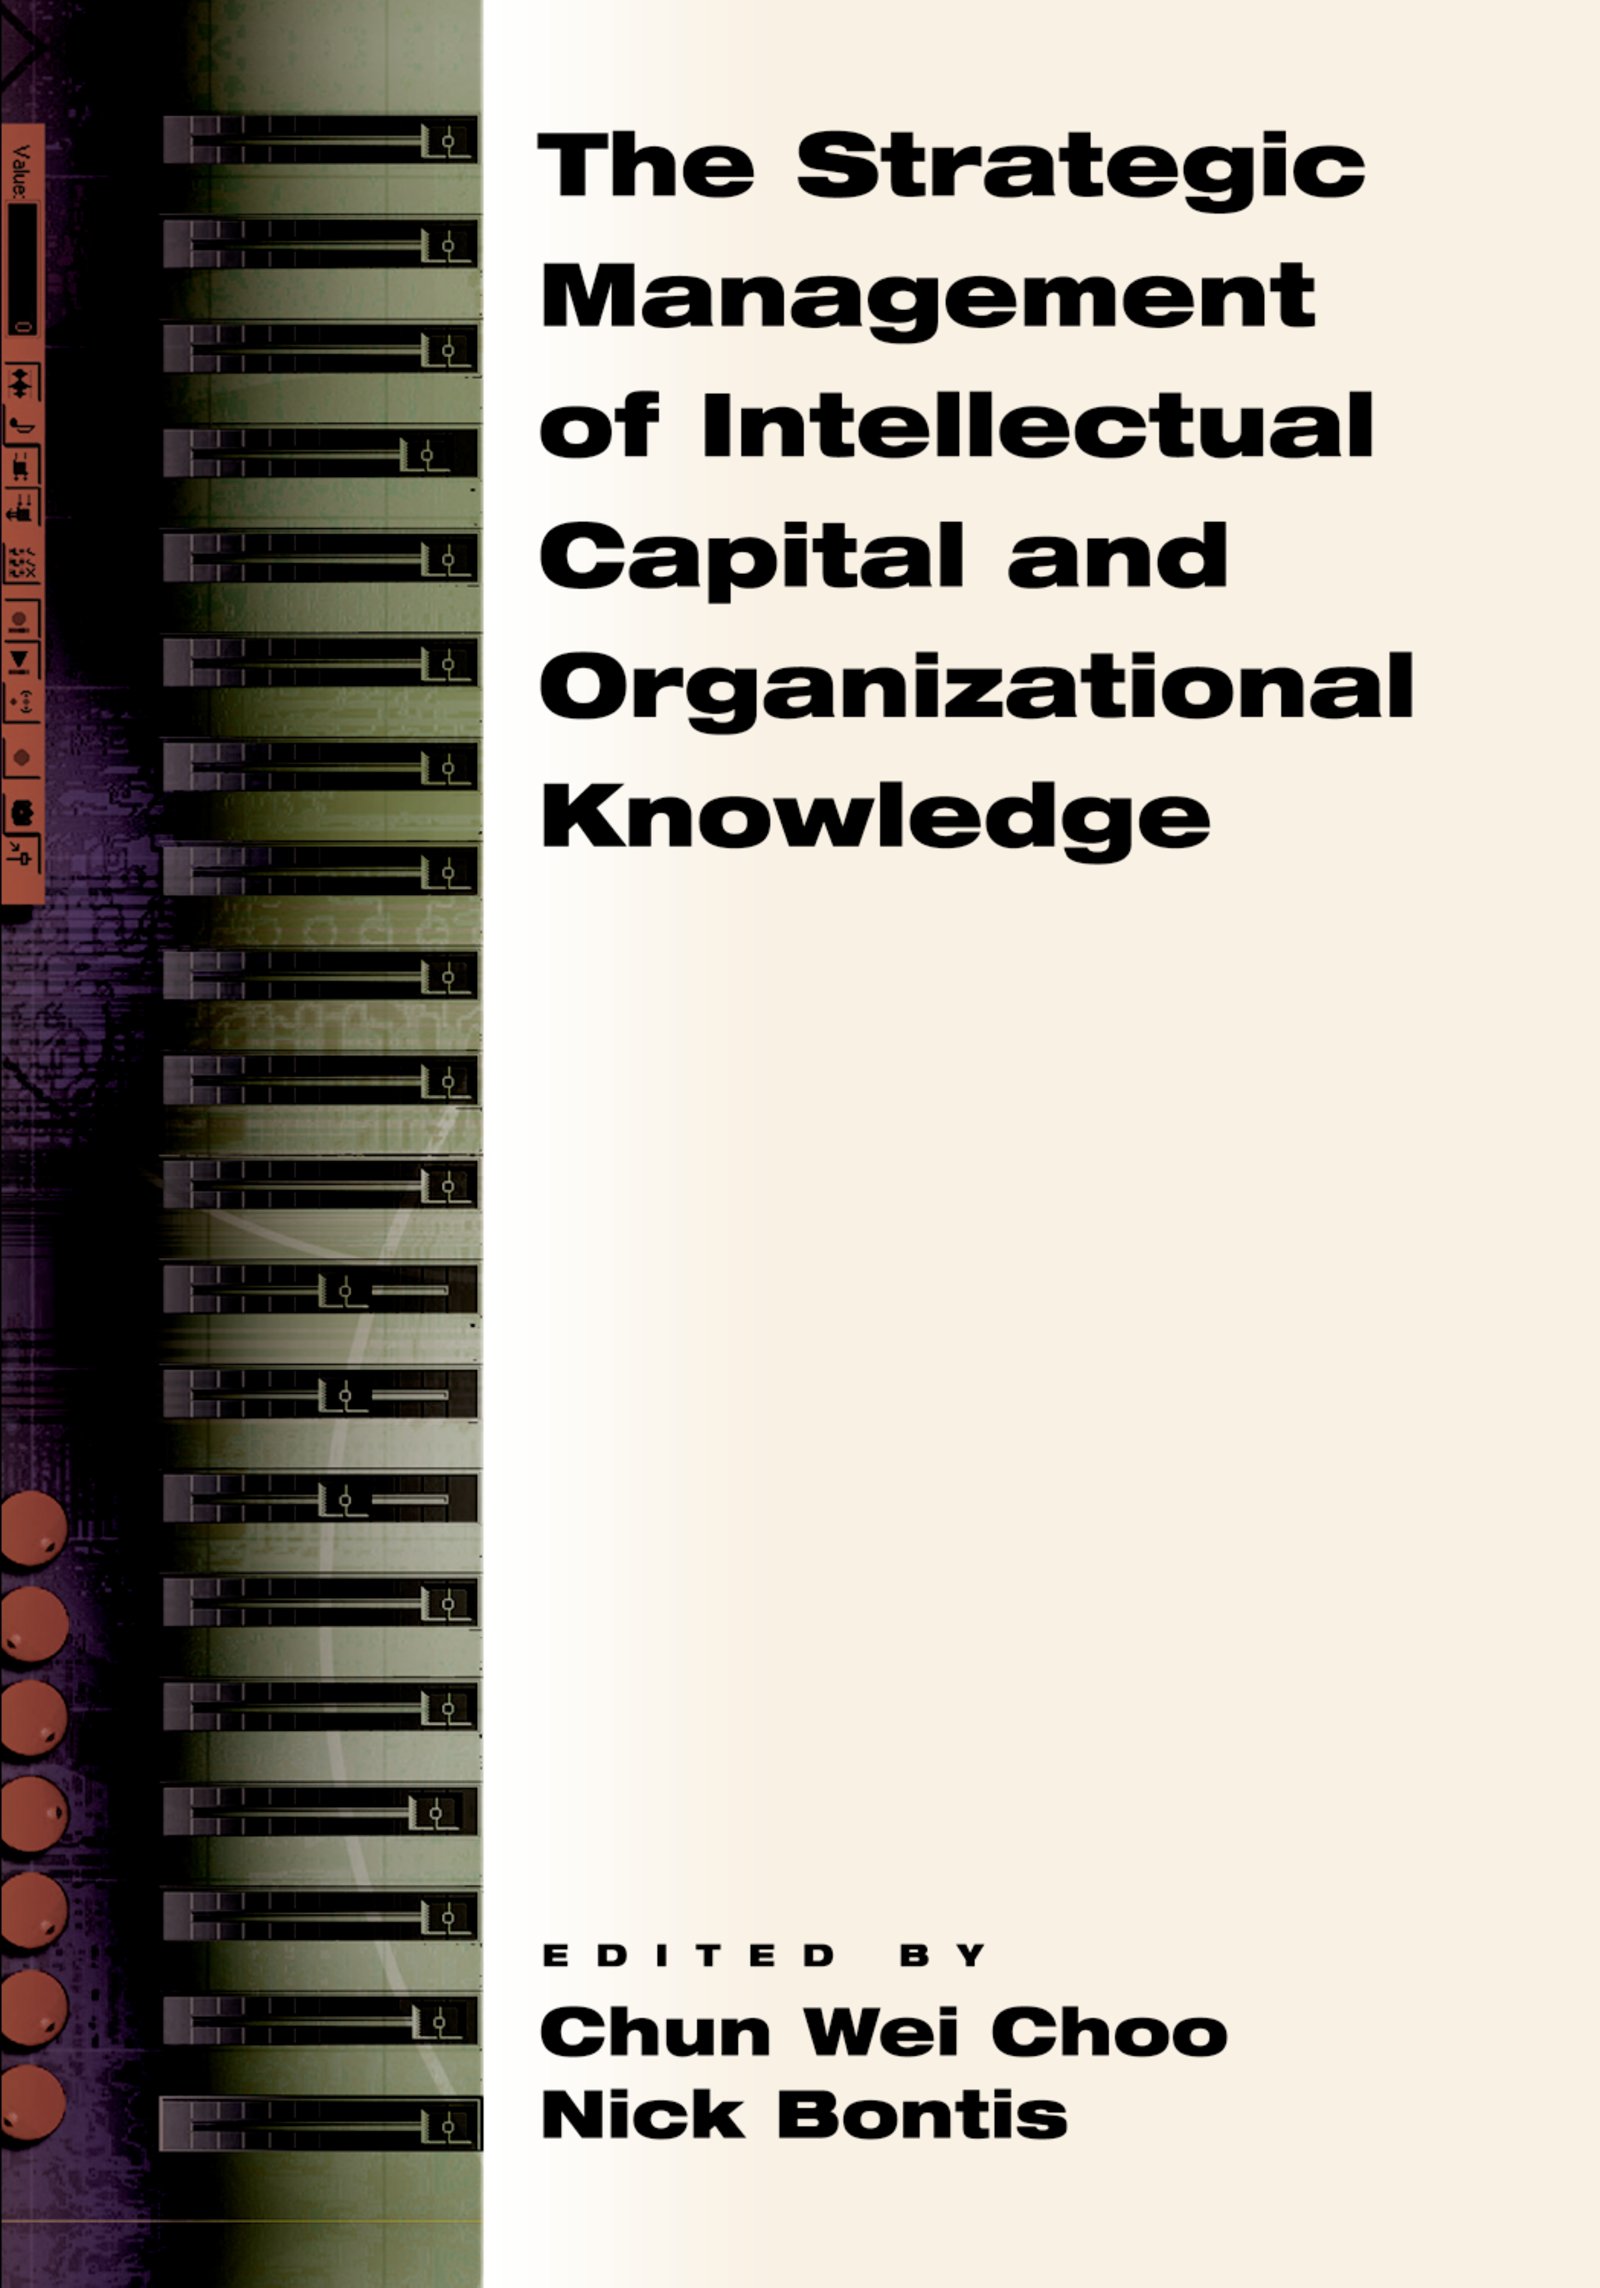 The Strategic Management of Intellectual Capital and Organizational Knowledge